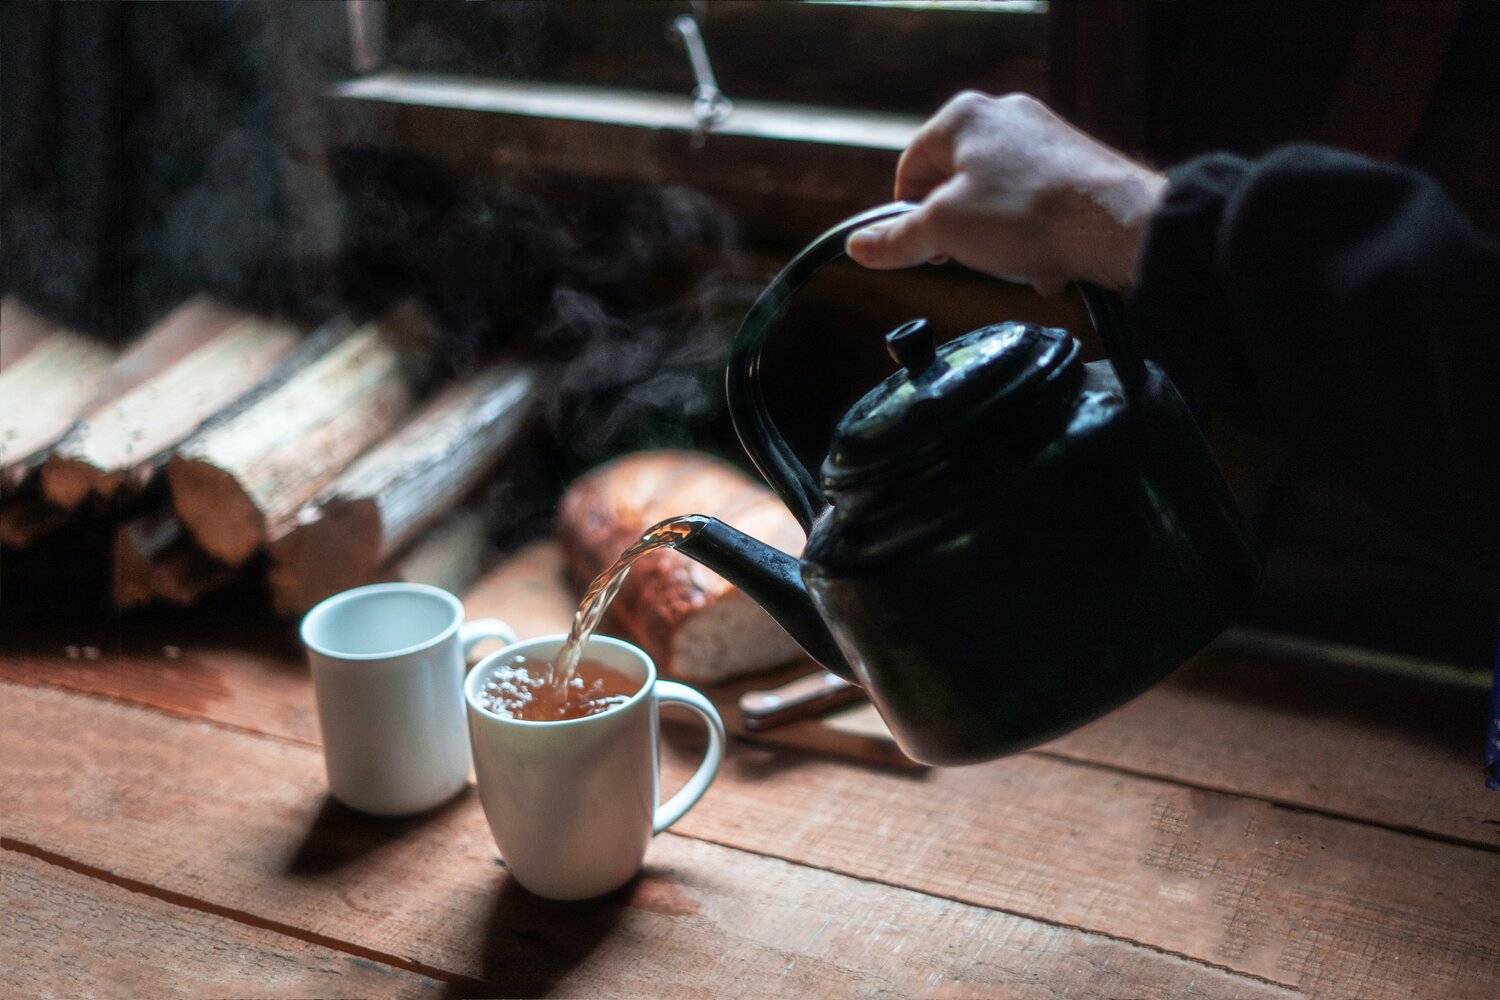 https://recipes.net/wp-content/uploads/2021/07/person-pouring-tea-on-a-cup.jpg